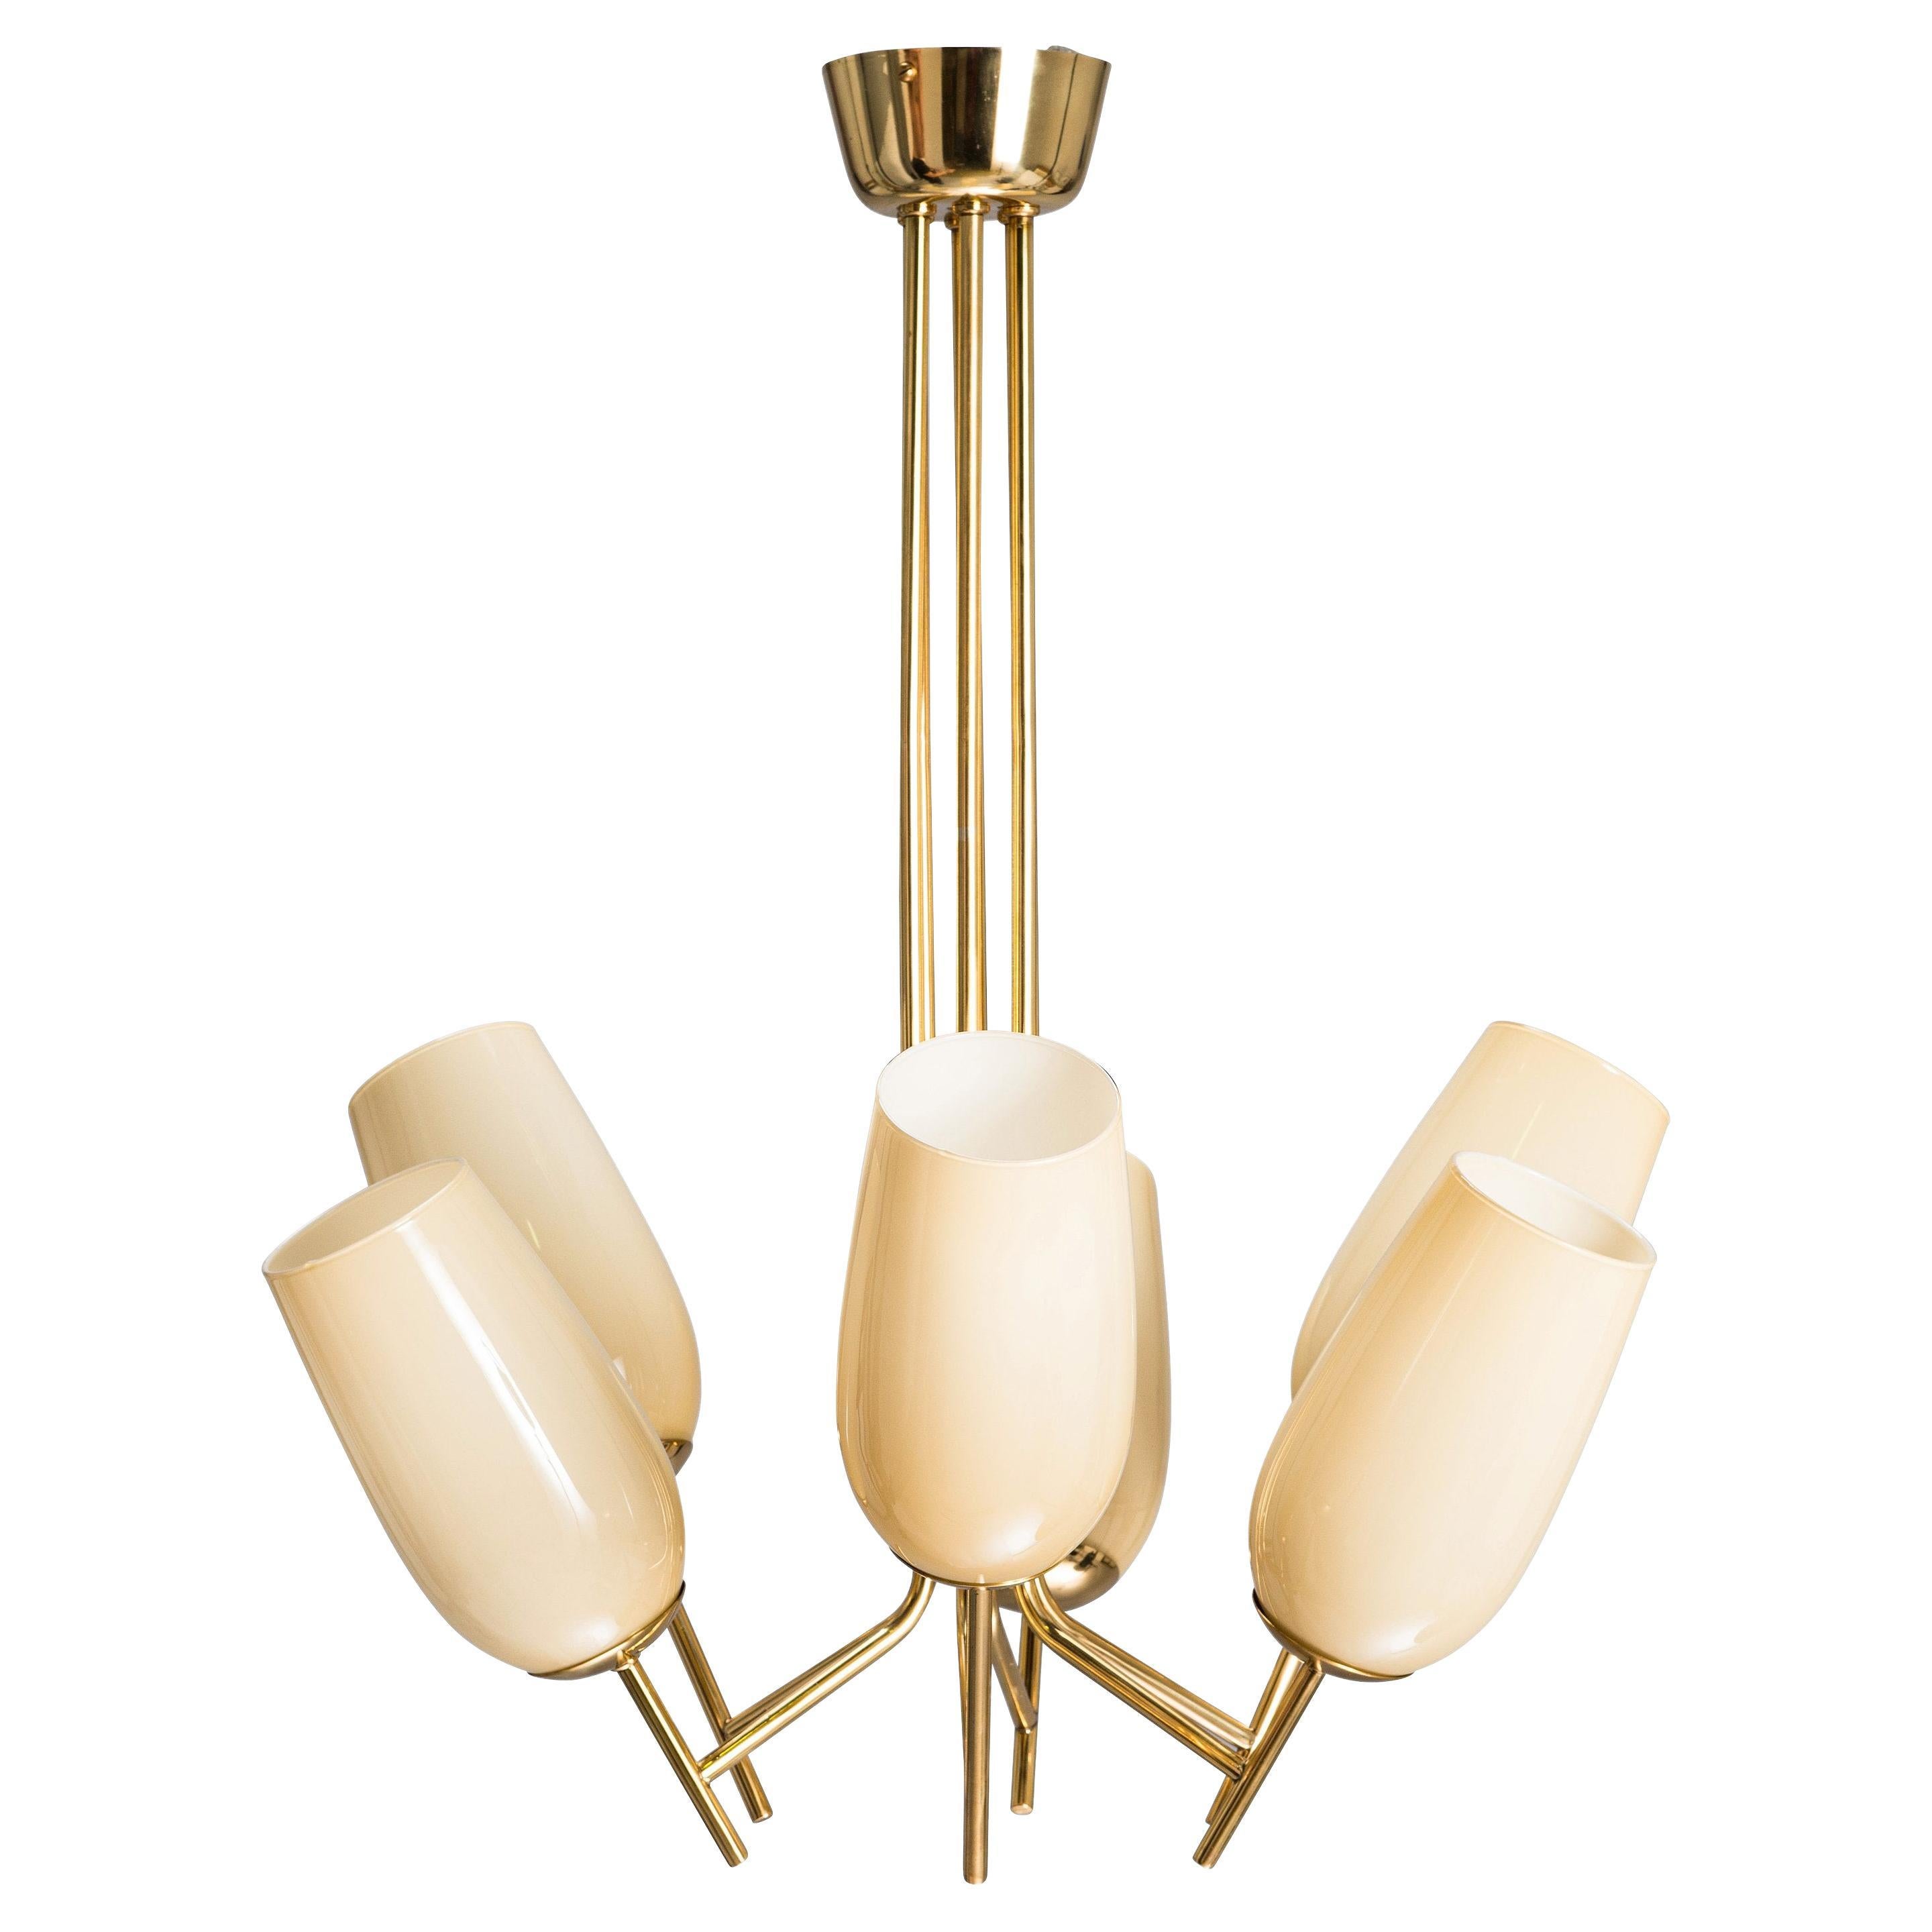 Paavo Tynell Six Arm Chandelier in Brass and Amber Glass, Taito, Finland, 1940s